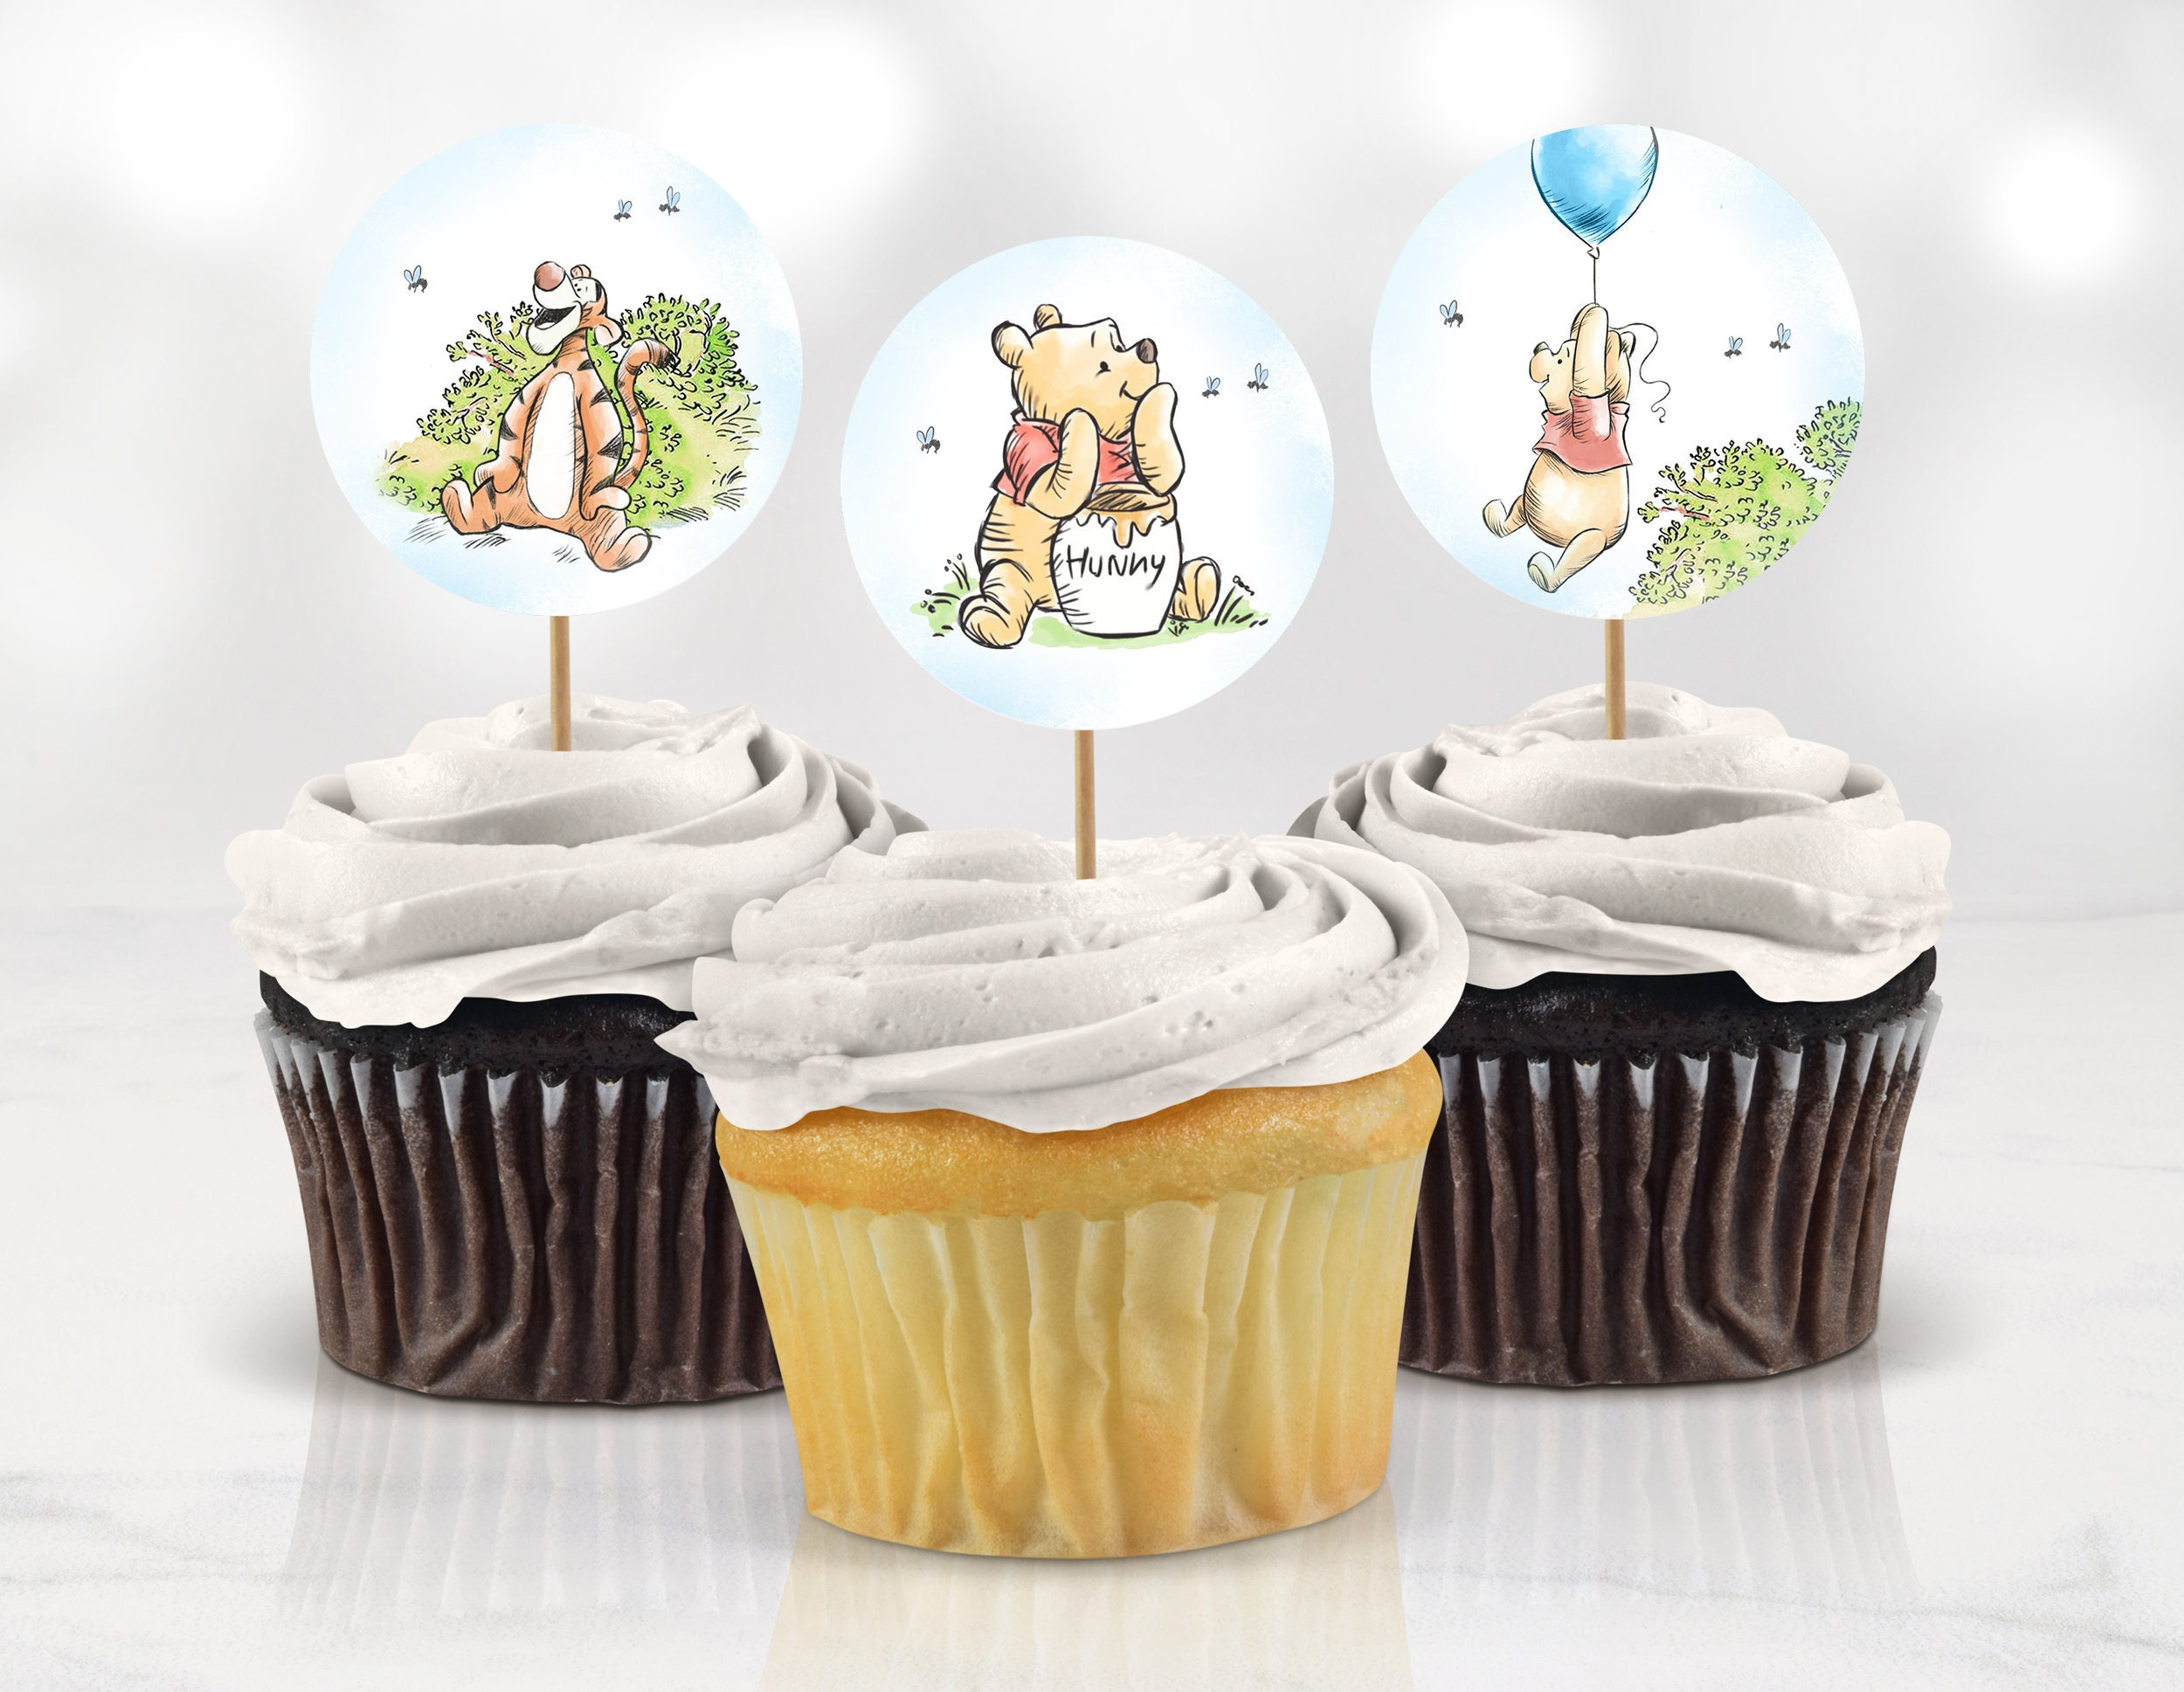 Winnie the Pooh Cupcake Topper Decorations, Party Decoration Centerpieces,  Classic Pooh Bear Cut Out. Vintage Pooh Cake Topper, Digital 